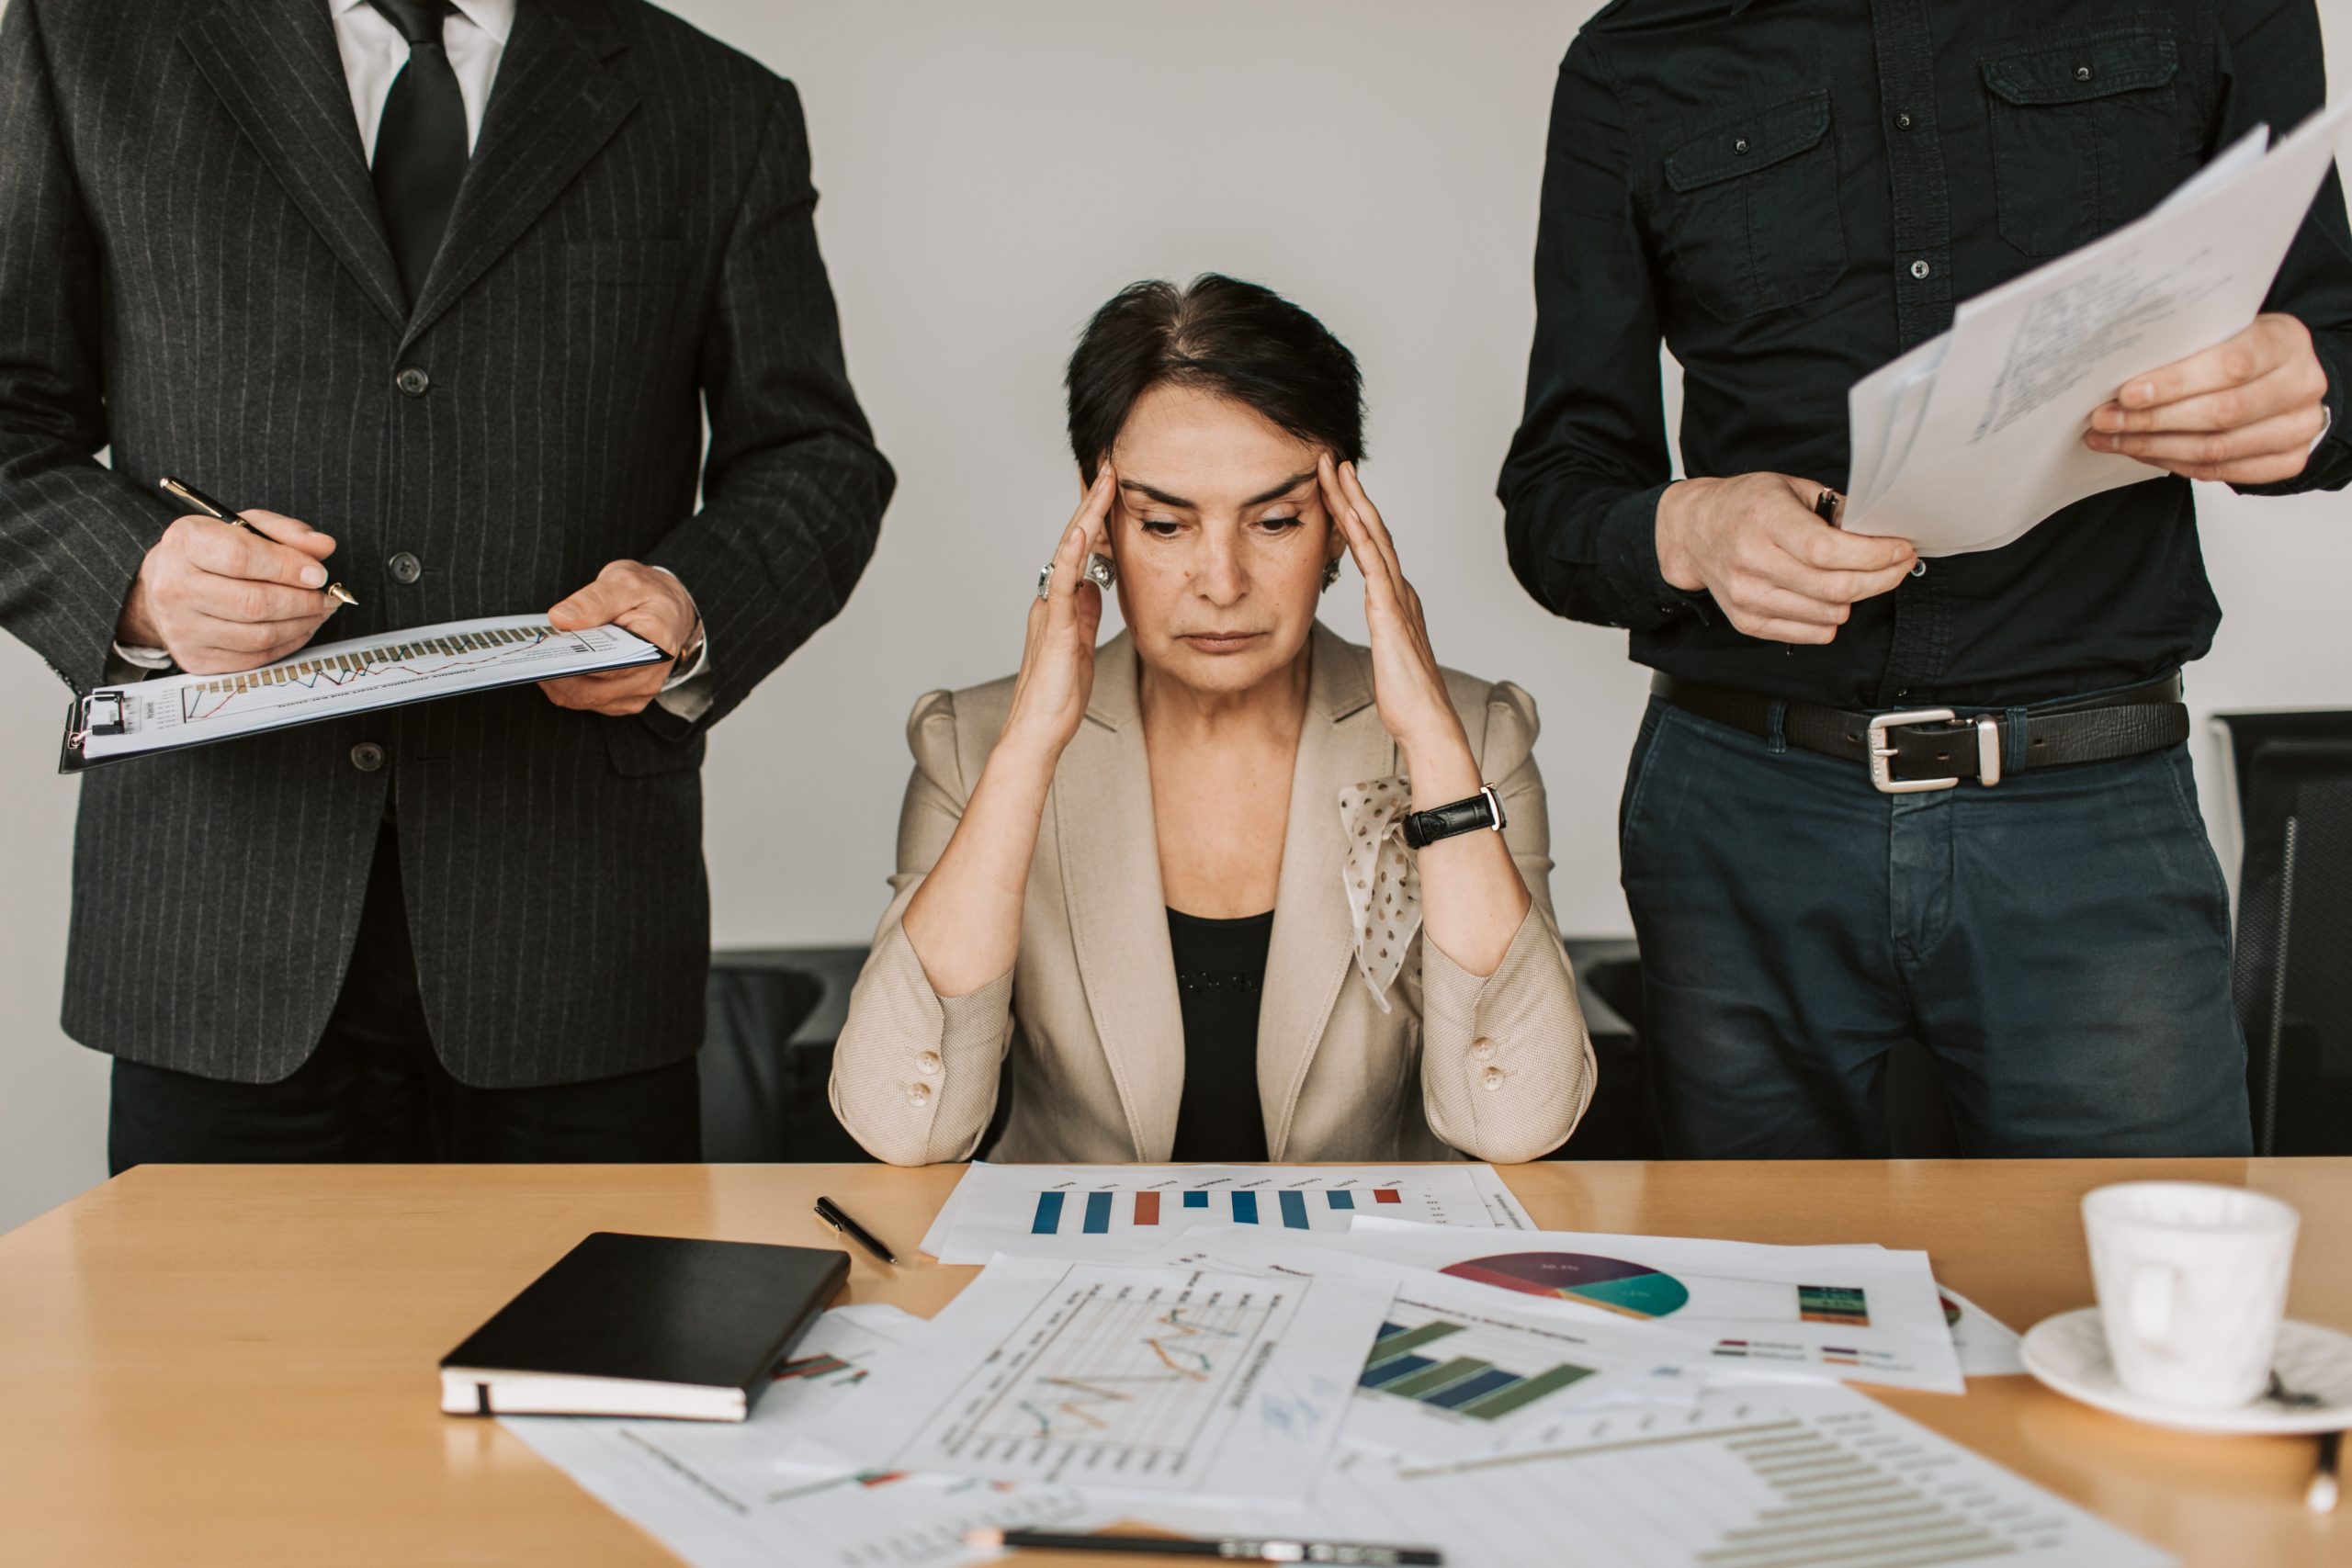 Overwhelmed woman holds her head in her hands, looking down at a mess of papers as men stand on either side of her with papers in their hands as if asking for things